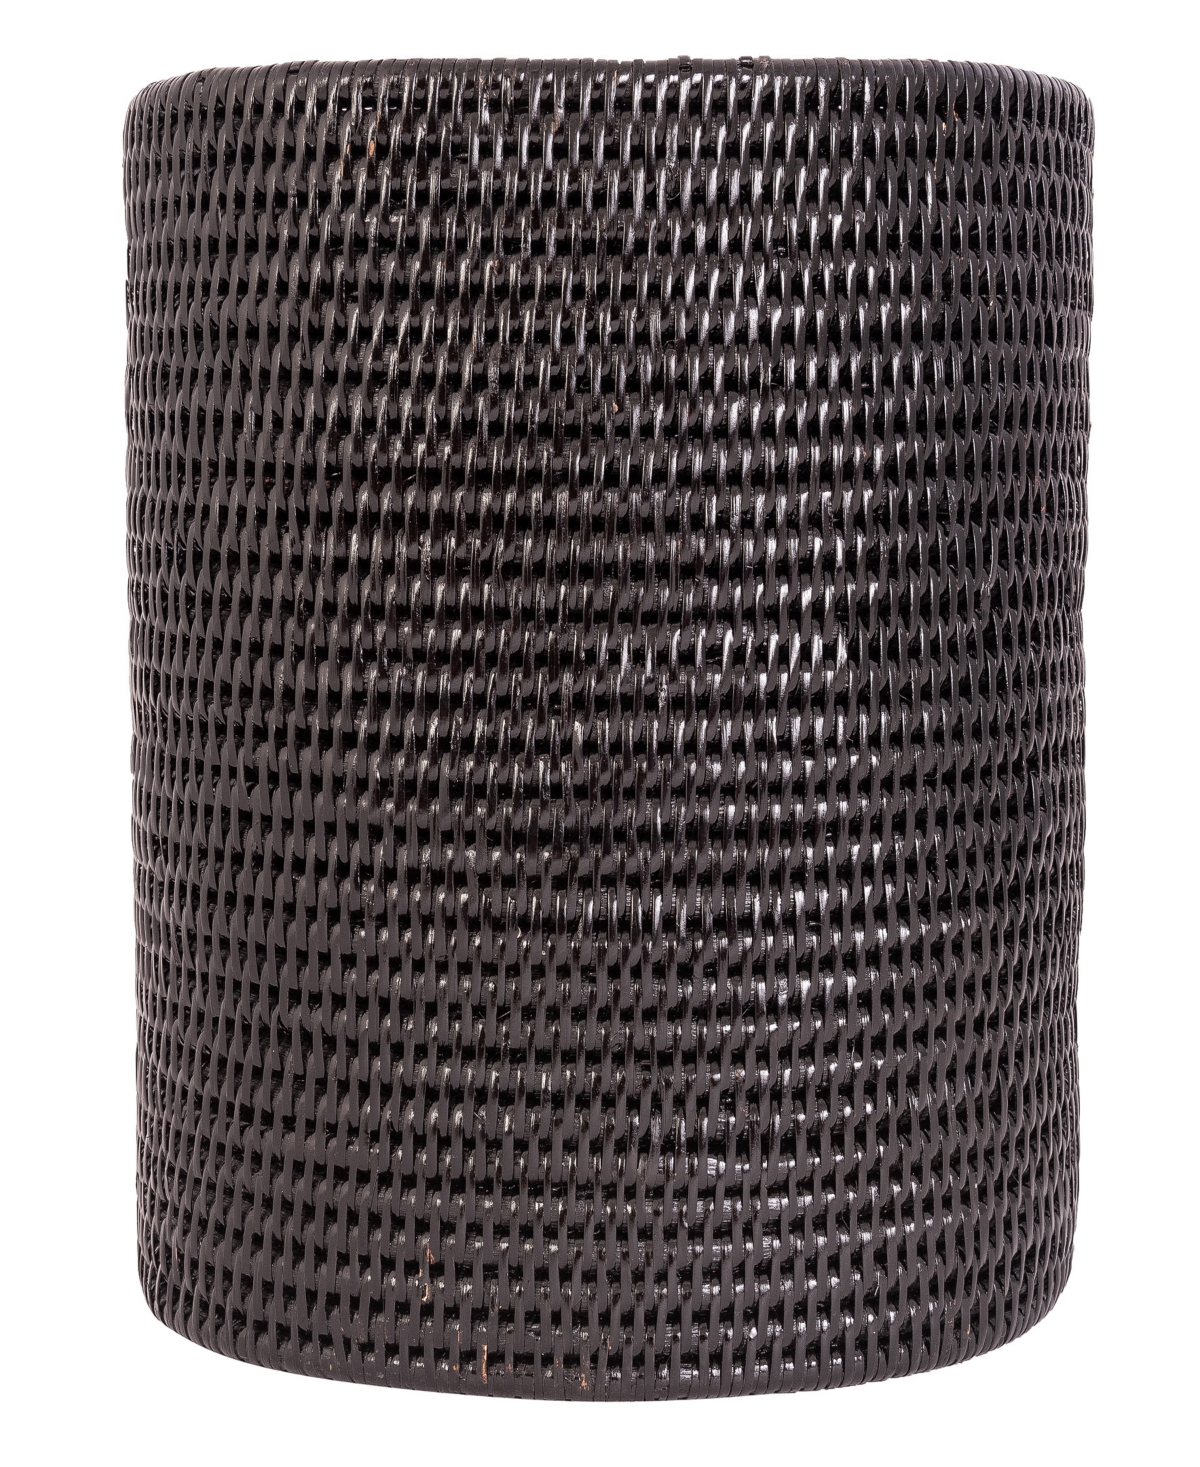 Artifacts Trading Company Rattan Oval Waste Basket With Metal Liner In Tudor Black